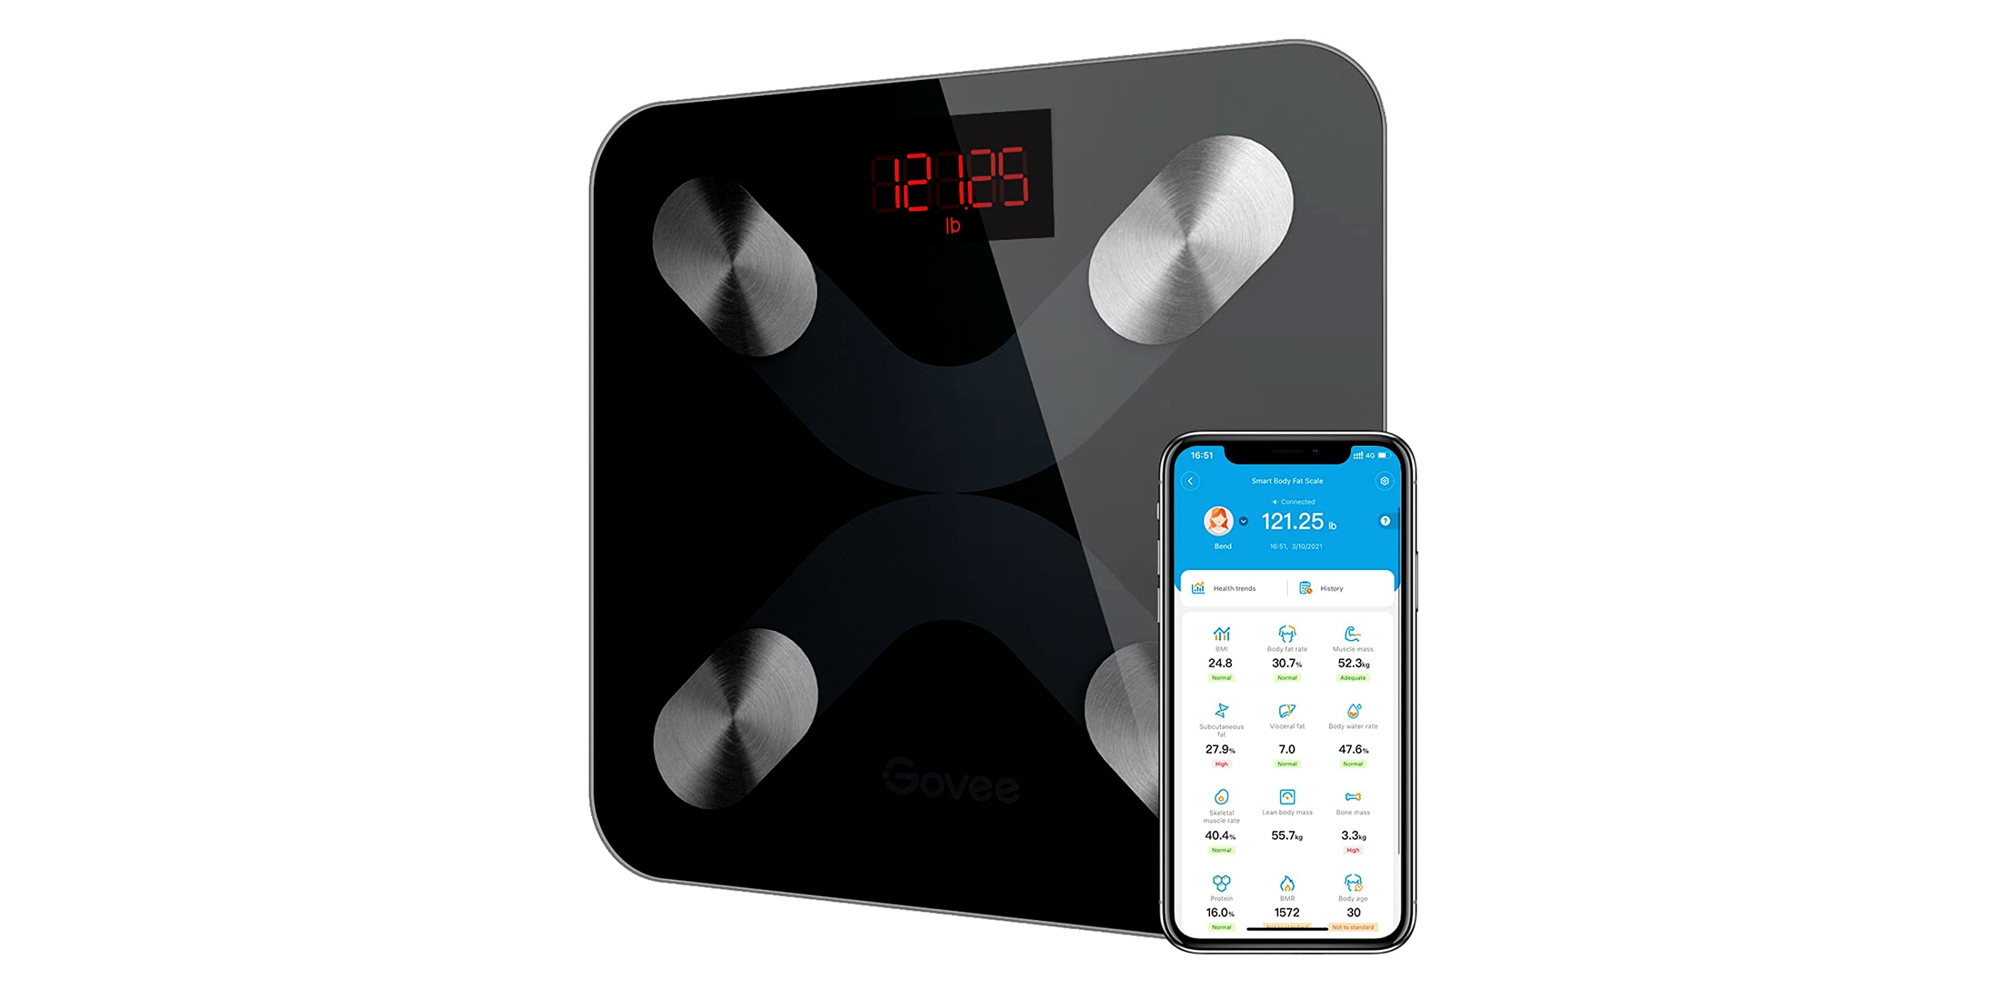 https://9to5toys.com/wp-content/uploads/sites/5/2021/11/Govee-Bluetooth-Smart-Scale.jpg